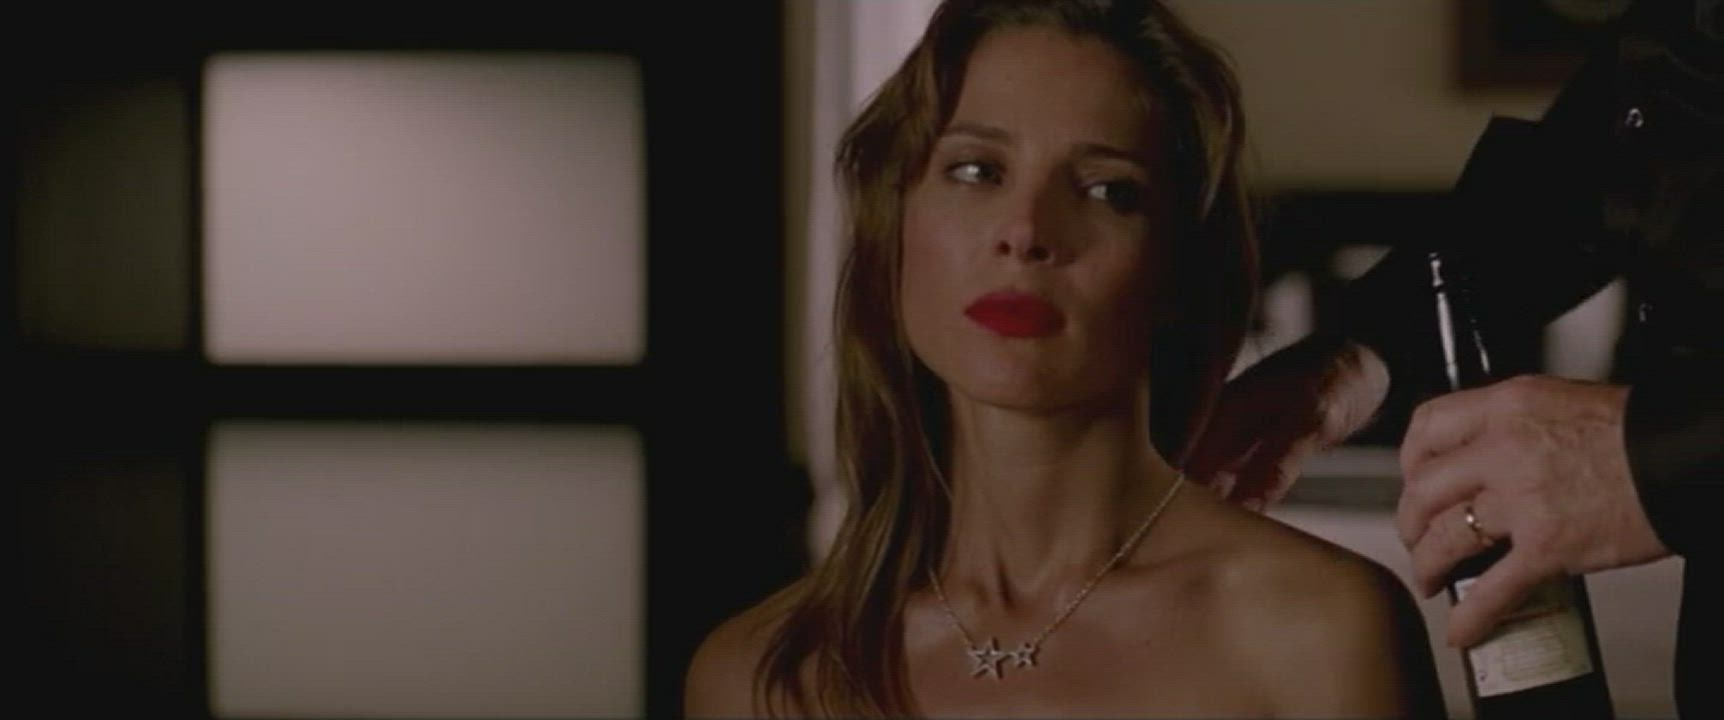 Elsa Pataky's boobs sucked in Di Di Hollywood's deleted scene. Anybody has a link